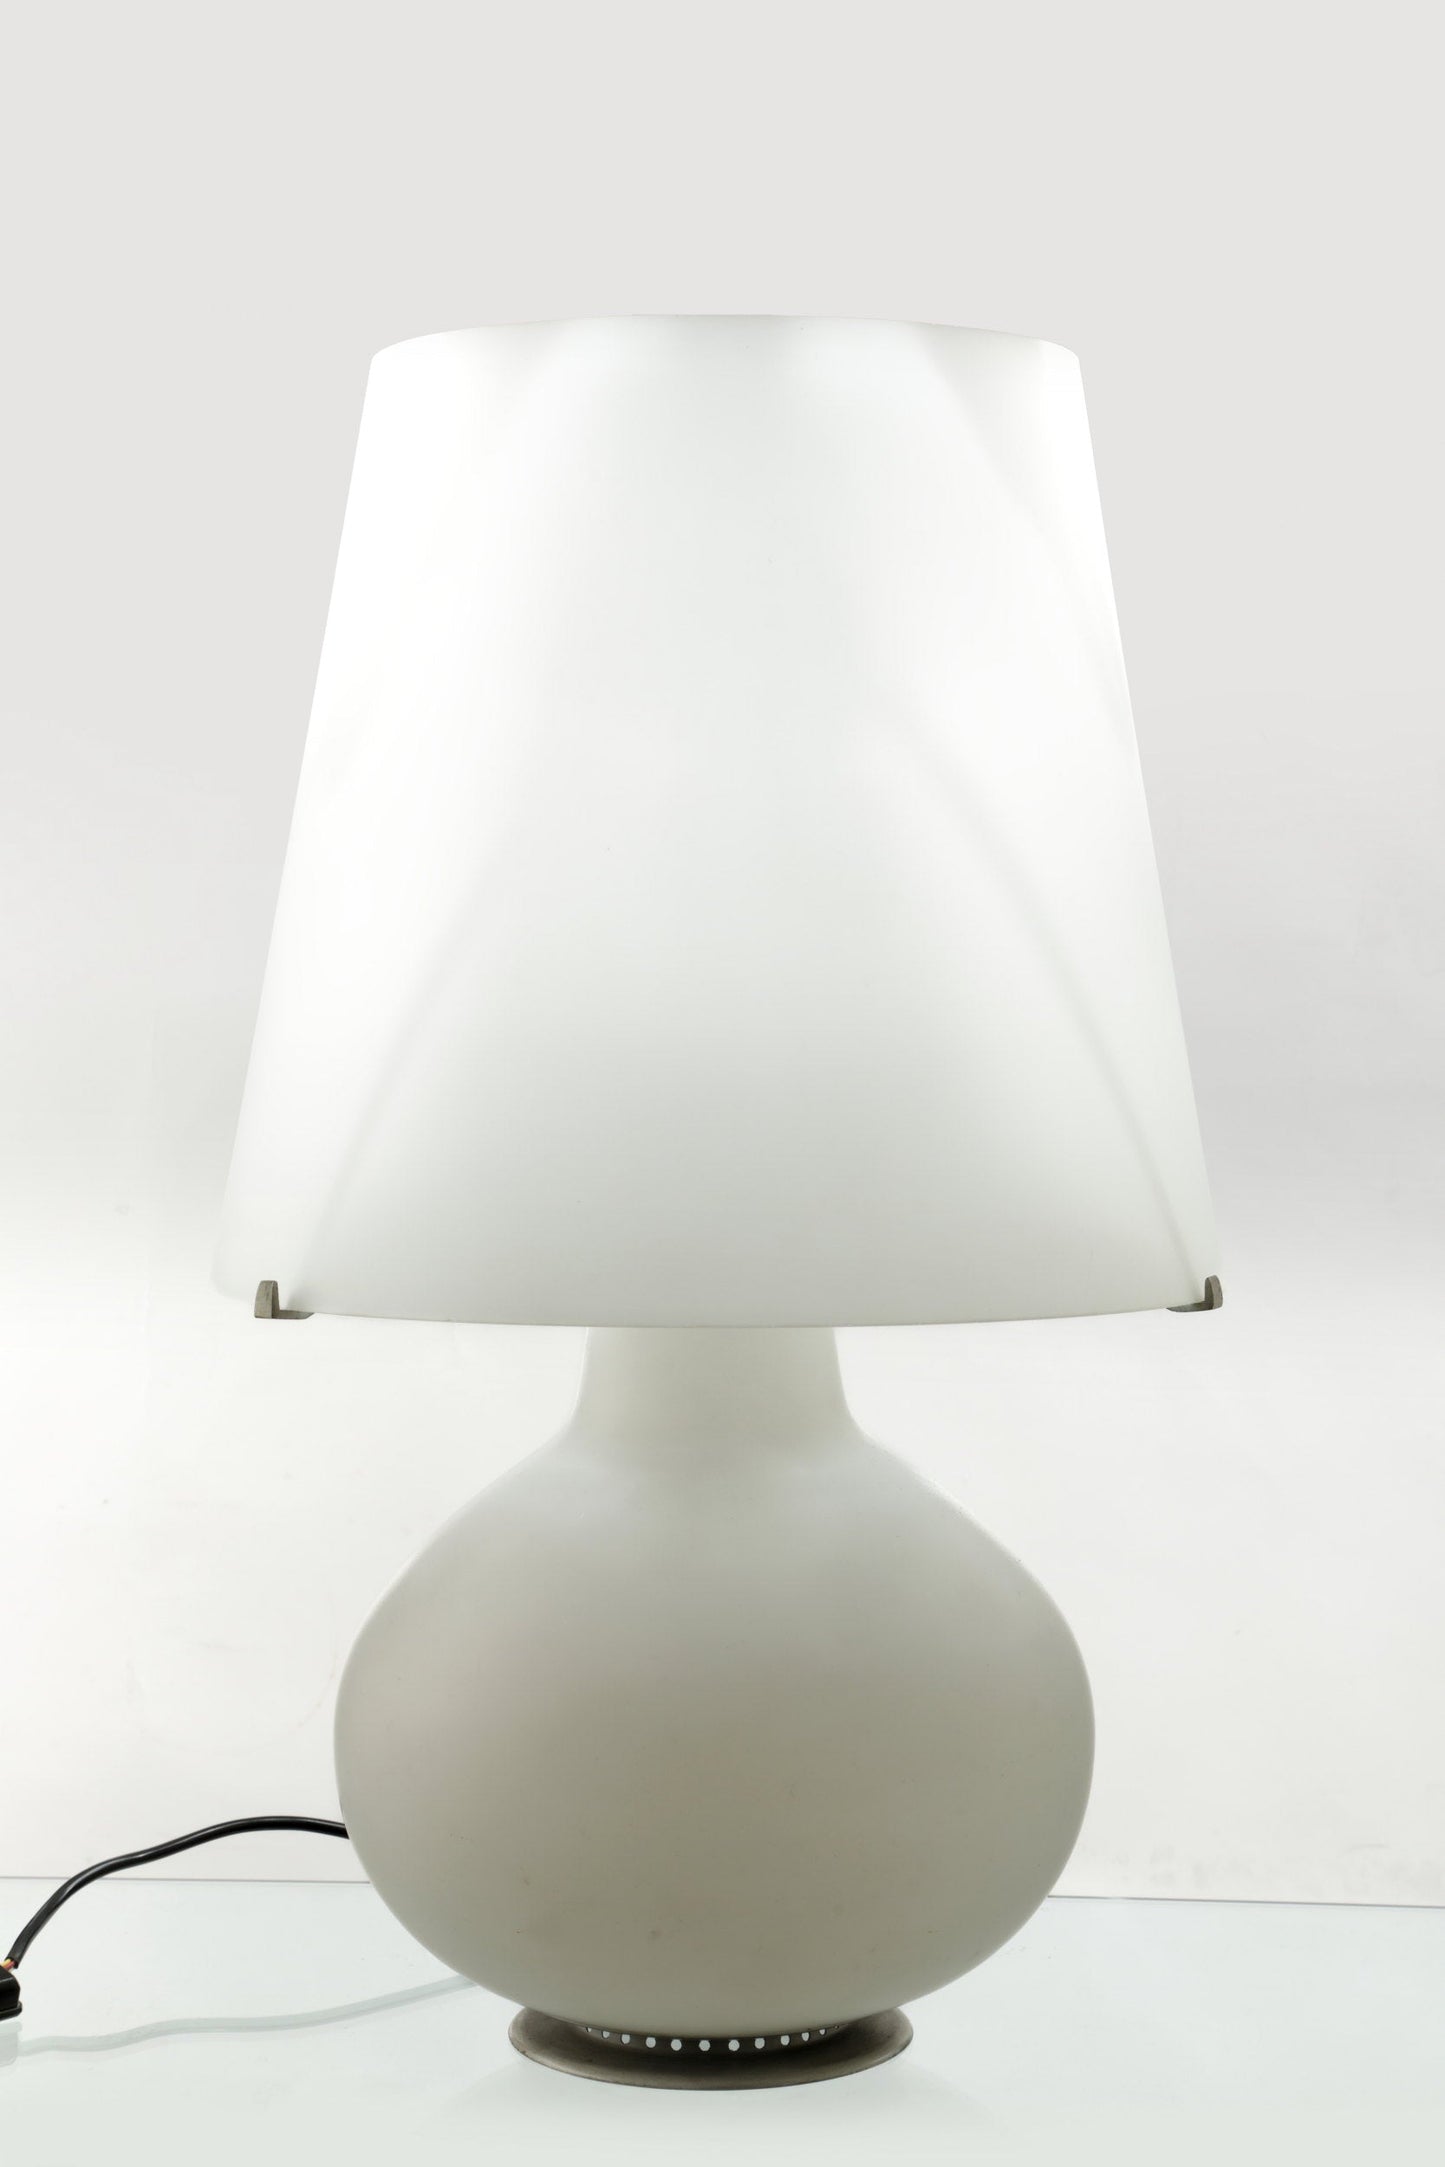 Max Ingrand lamp for Fontana Arte from the 70s